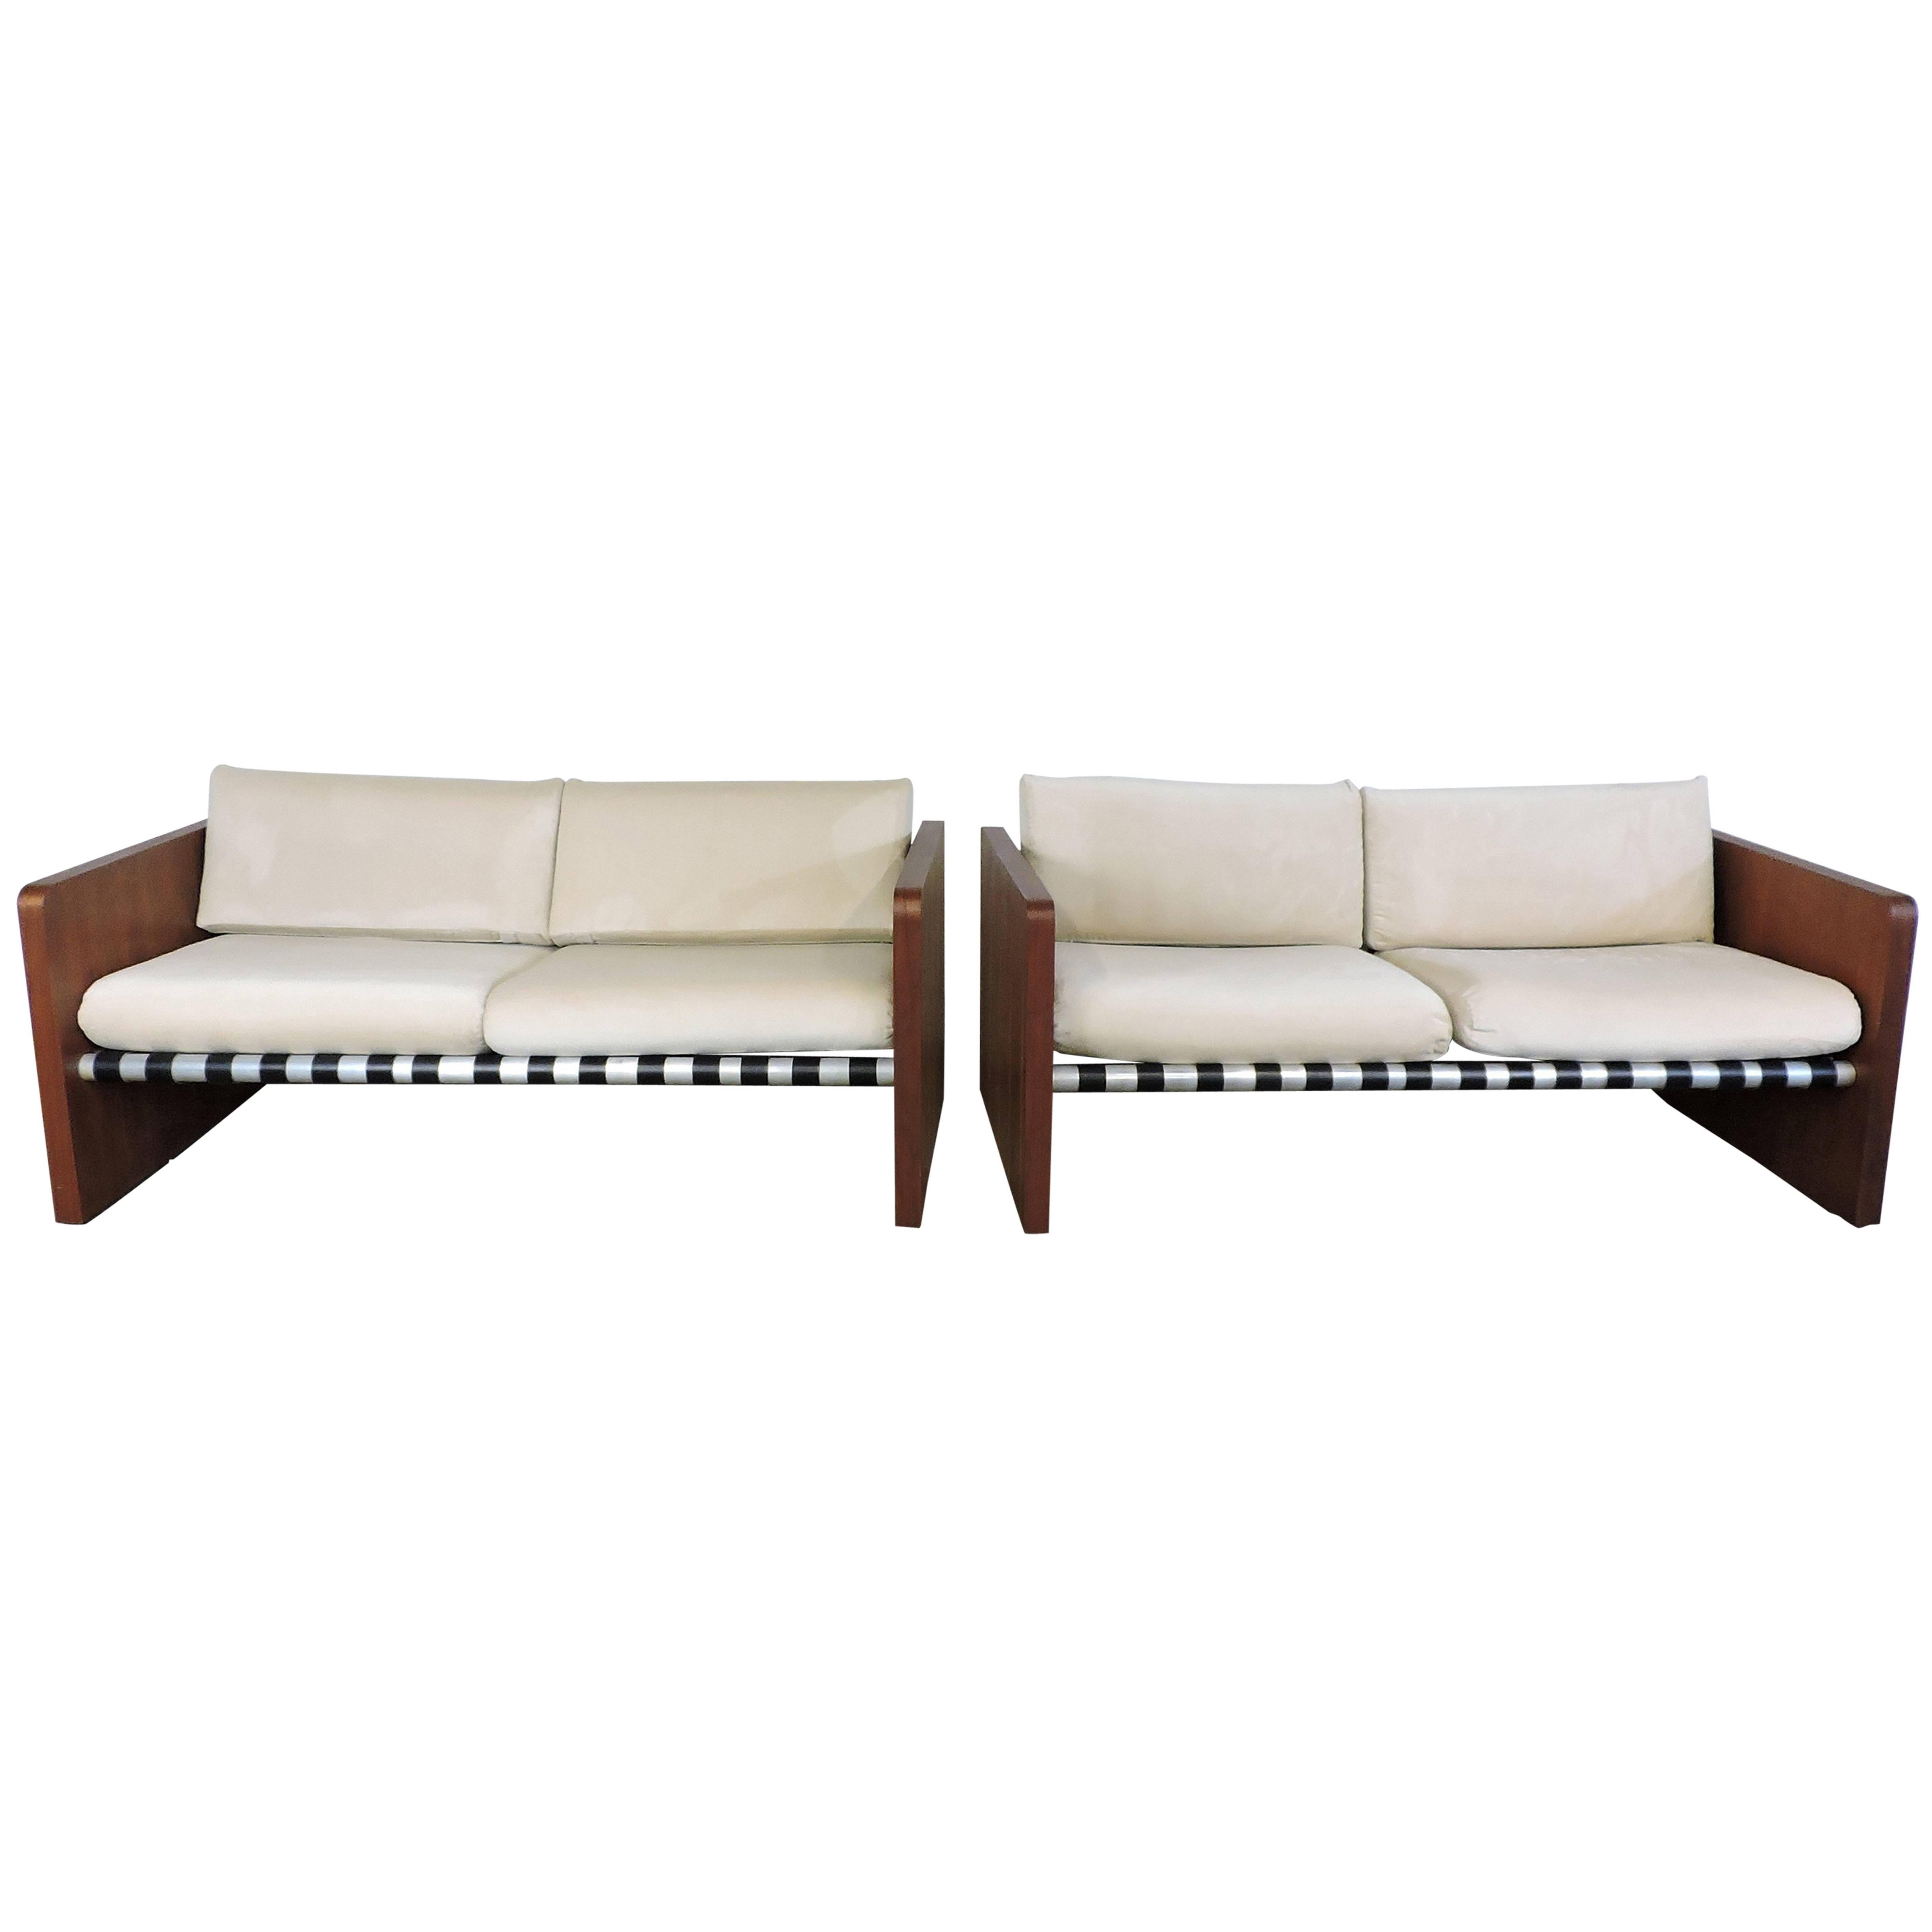 Pair of Mid-Century Modern Walnut Sling Sofas by Founders